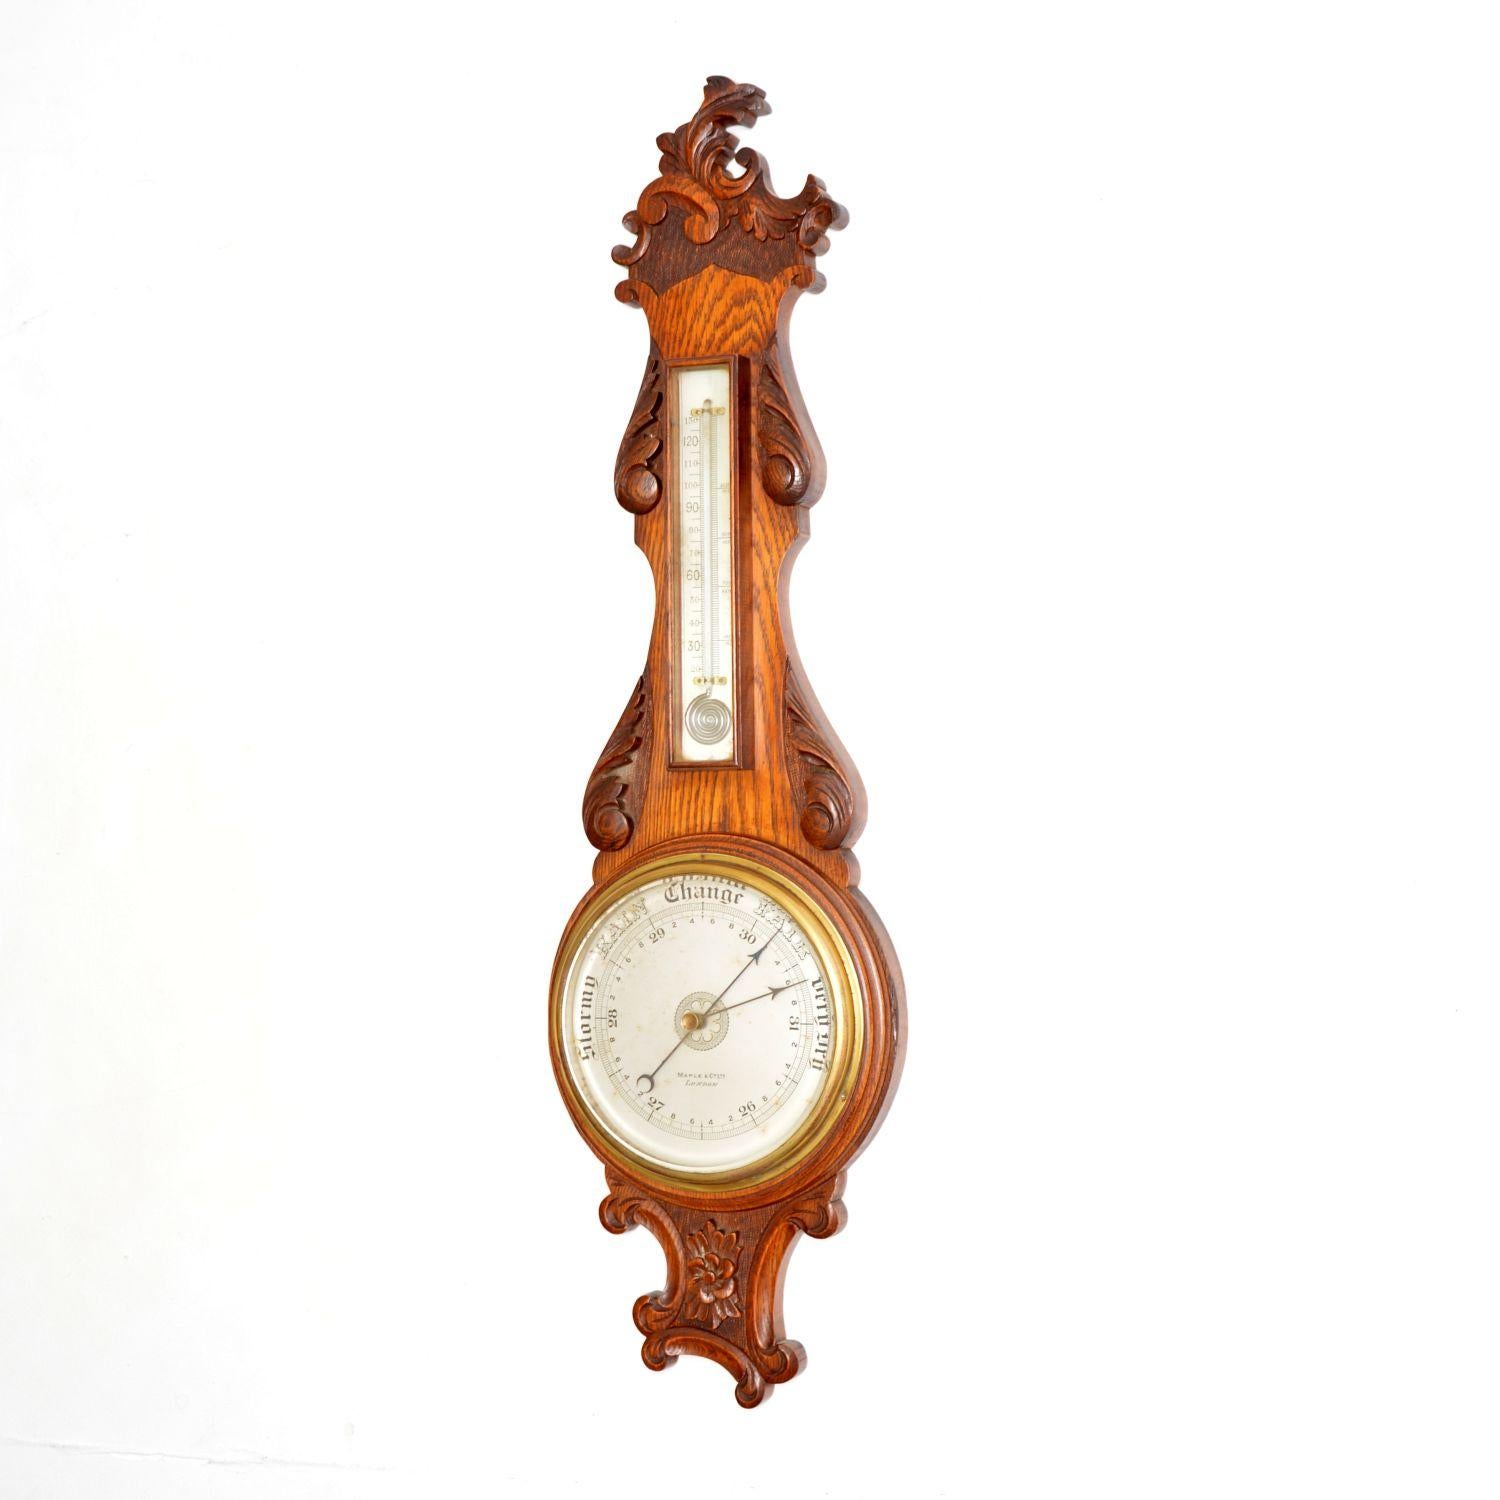 A wonderful antique Victorian banjo barometer in carved solid oak. This was made in London by Maple and Co, it dates from around the 1860-1880 period.

It is of amazing quality, beautifully designed and it appears to be in excellent condition for